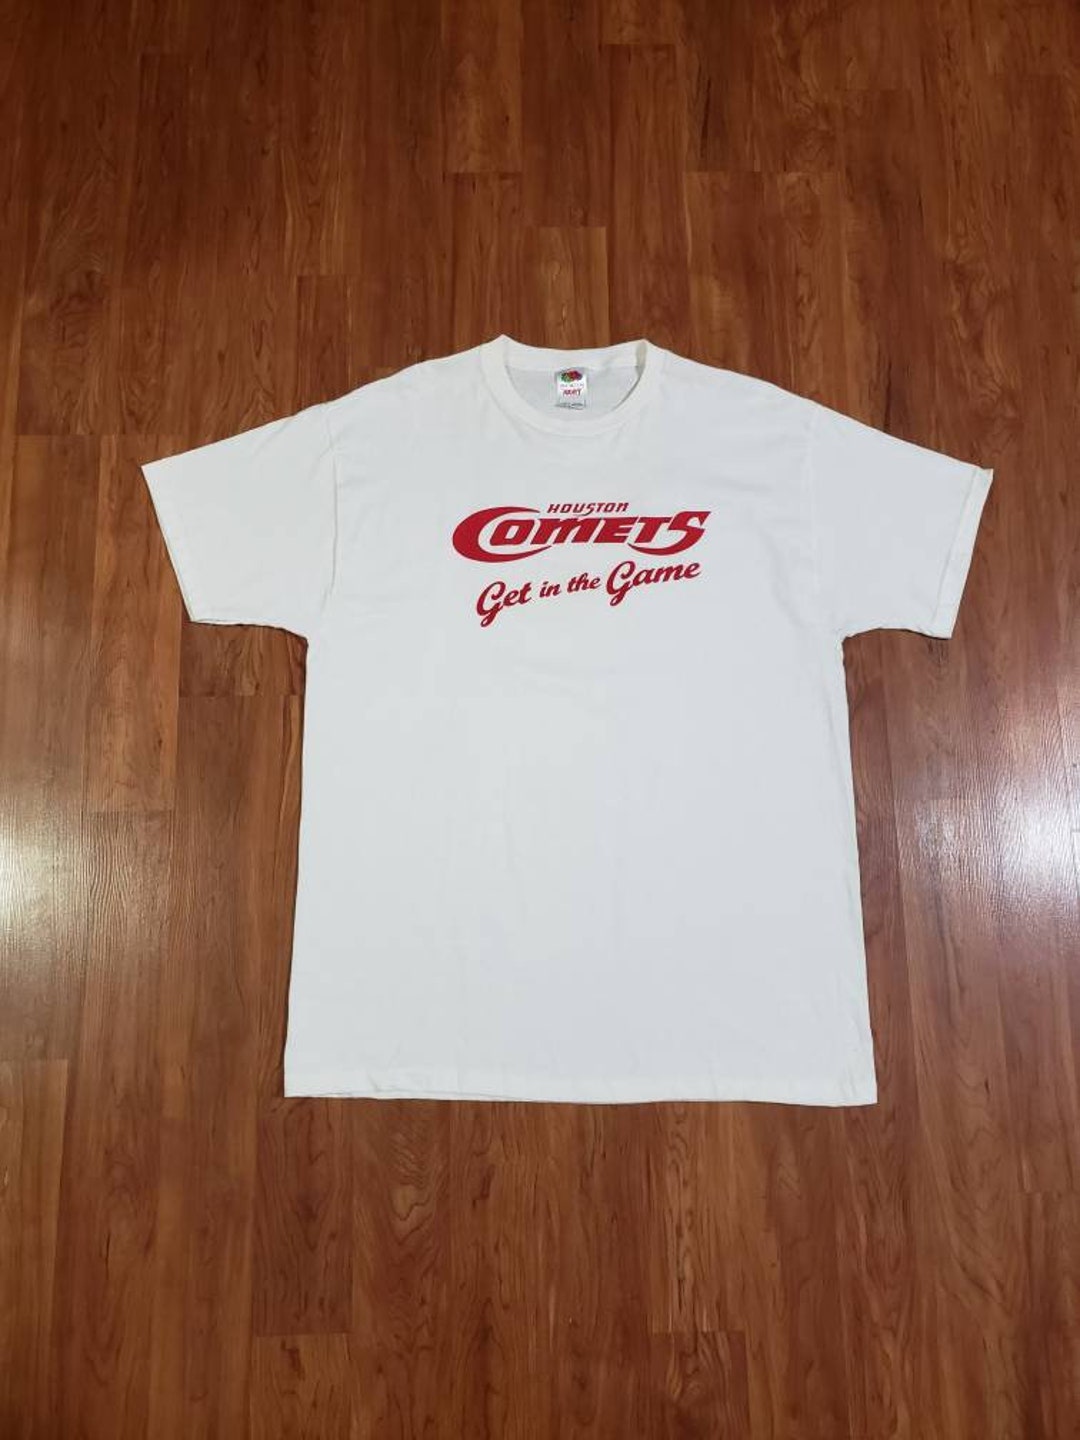 Vintage Houston Texas Comets Sheryl Swoopes Get in the Game Tshirt ...